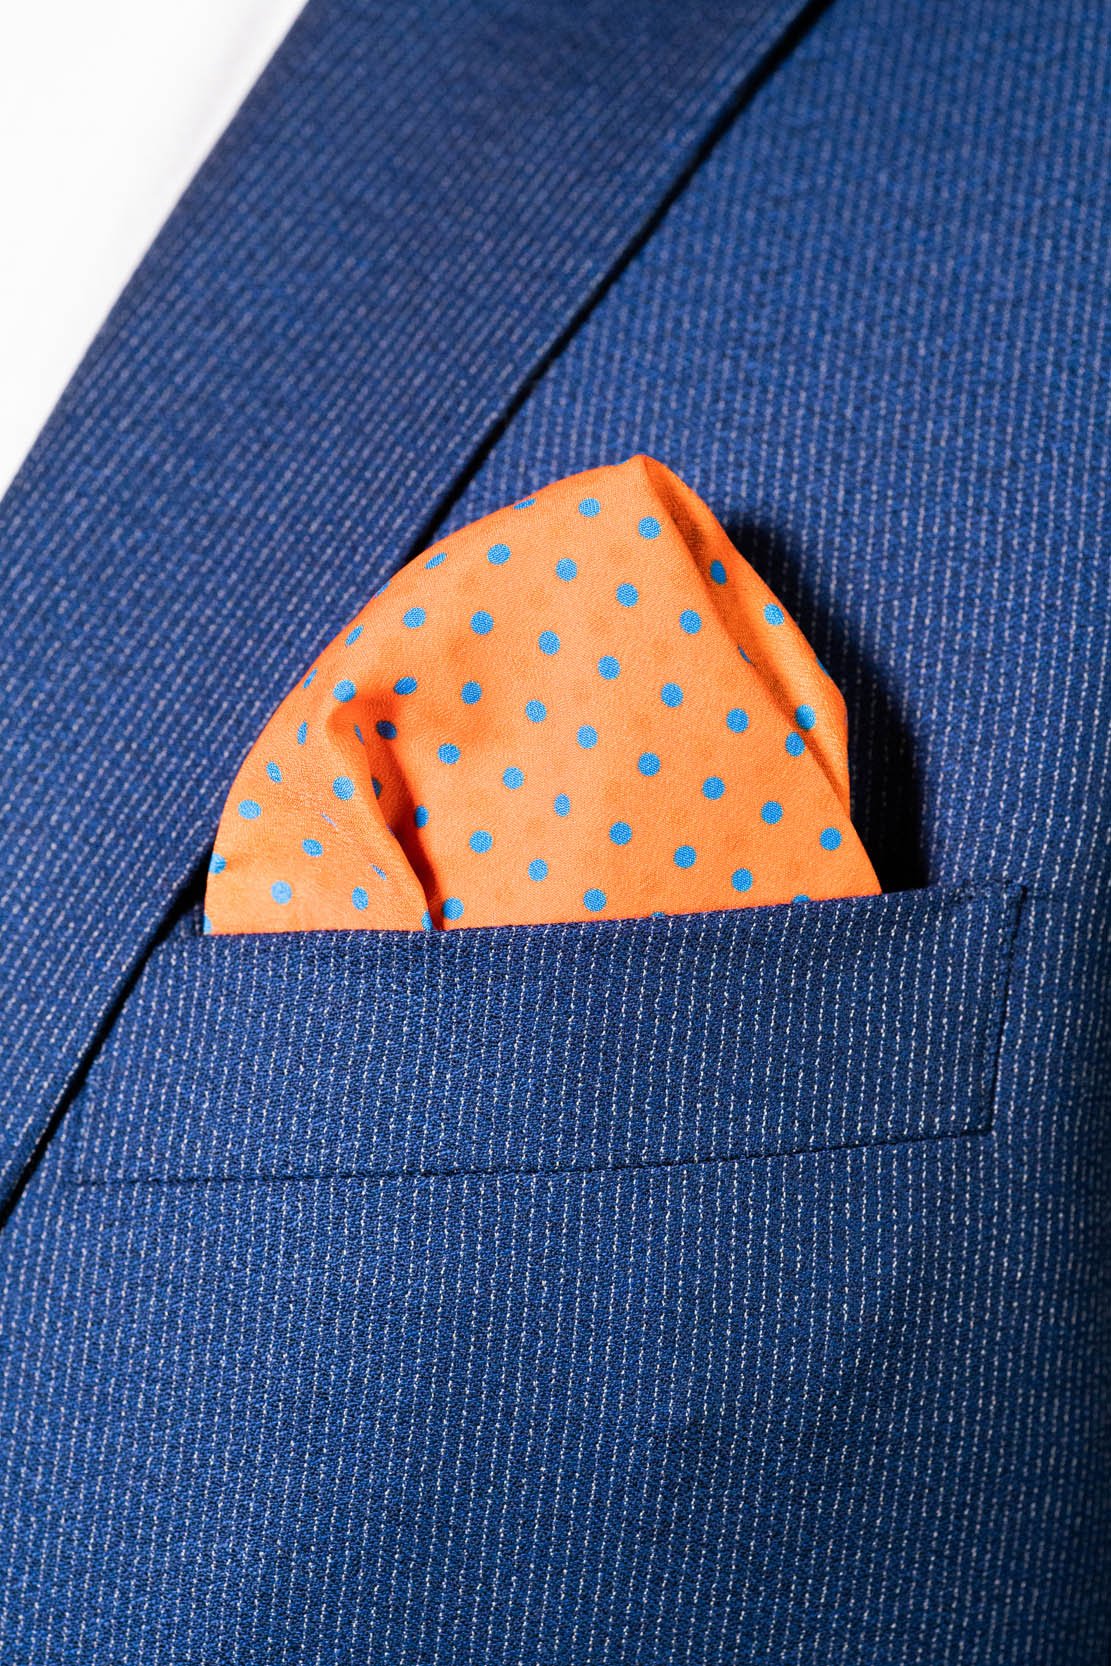 RARE CUT's Pumpkin Spice Dots Pocket Square Worn in a Suit Jacket